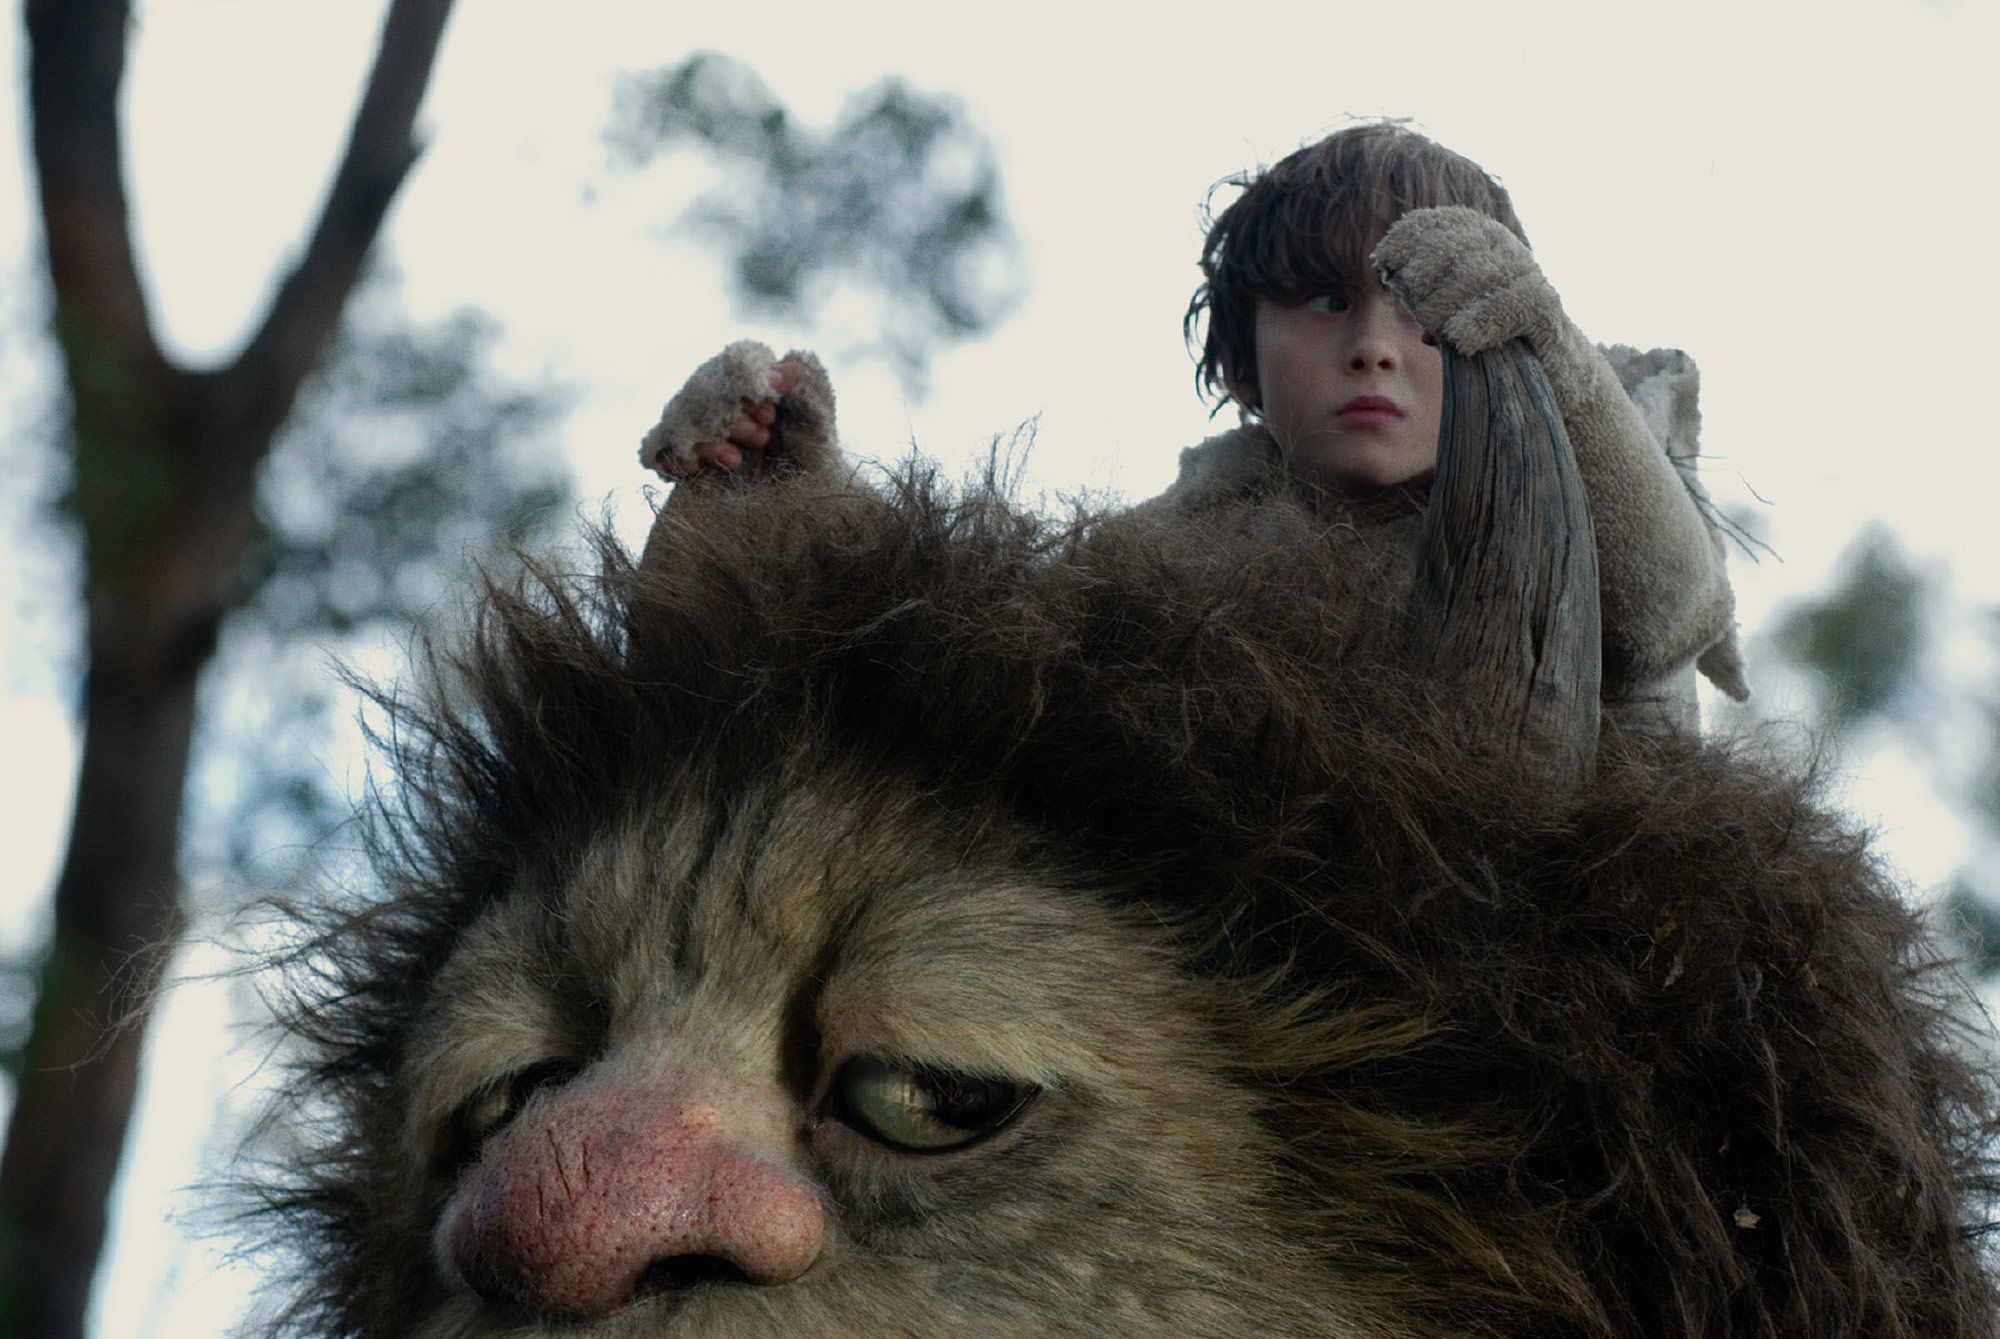 Where the Wild Things Are Photo #1